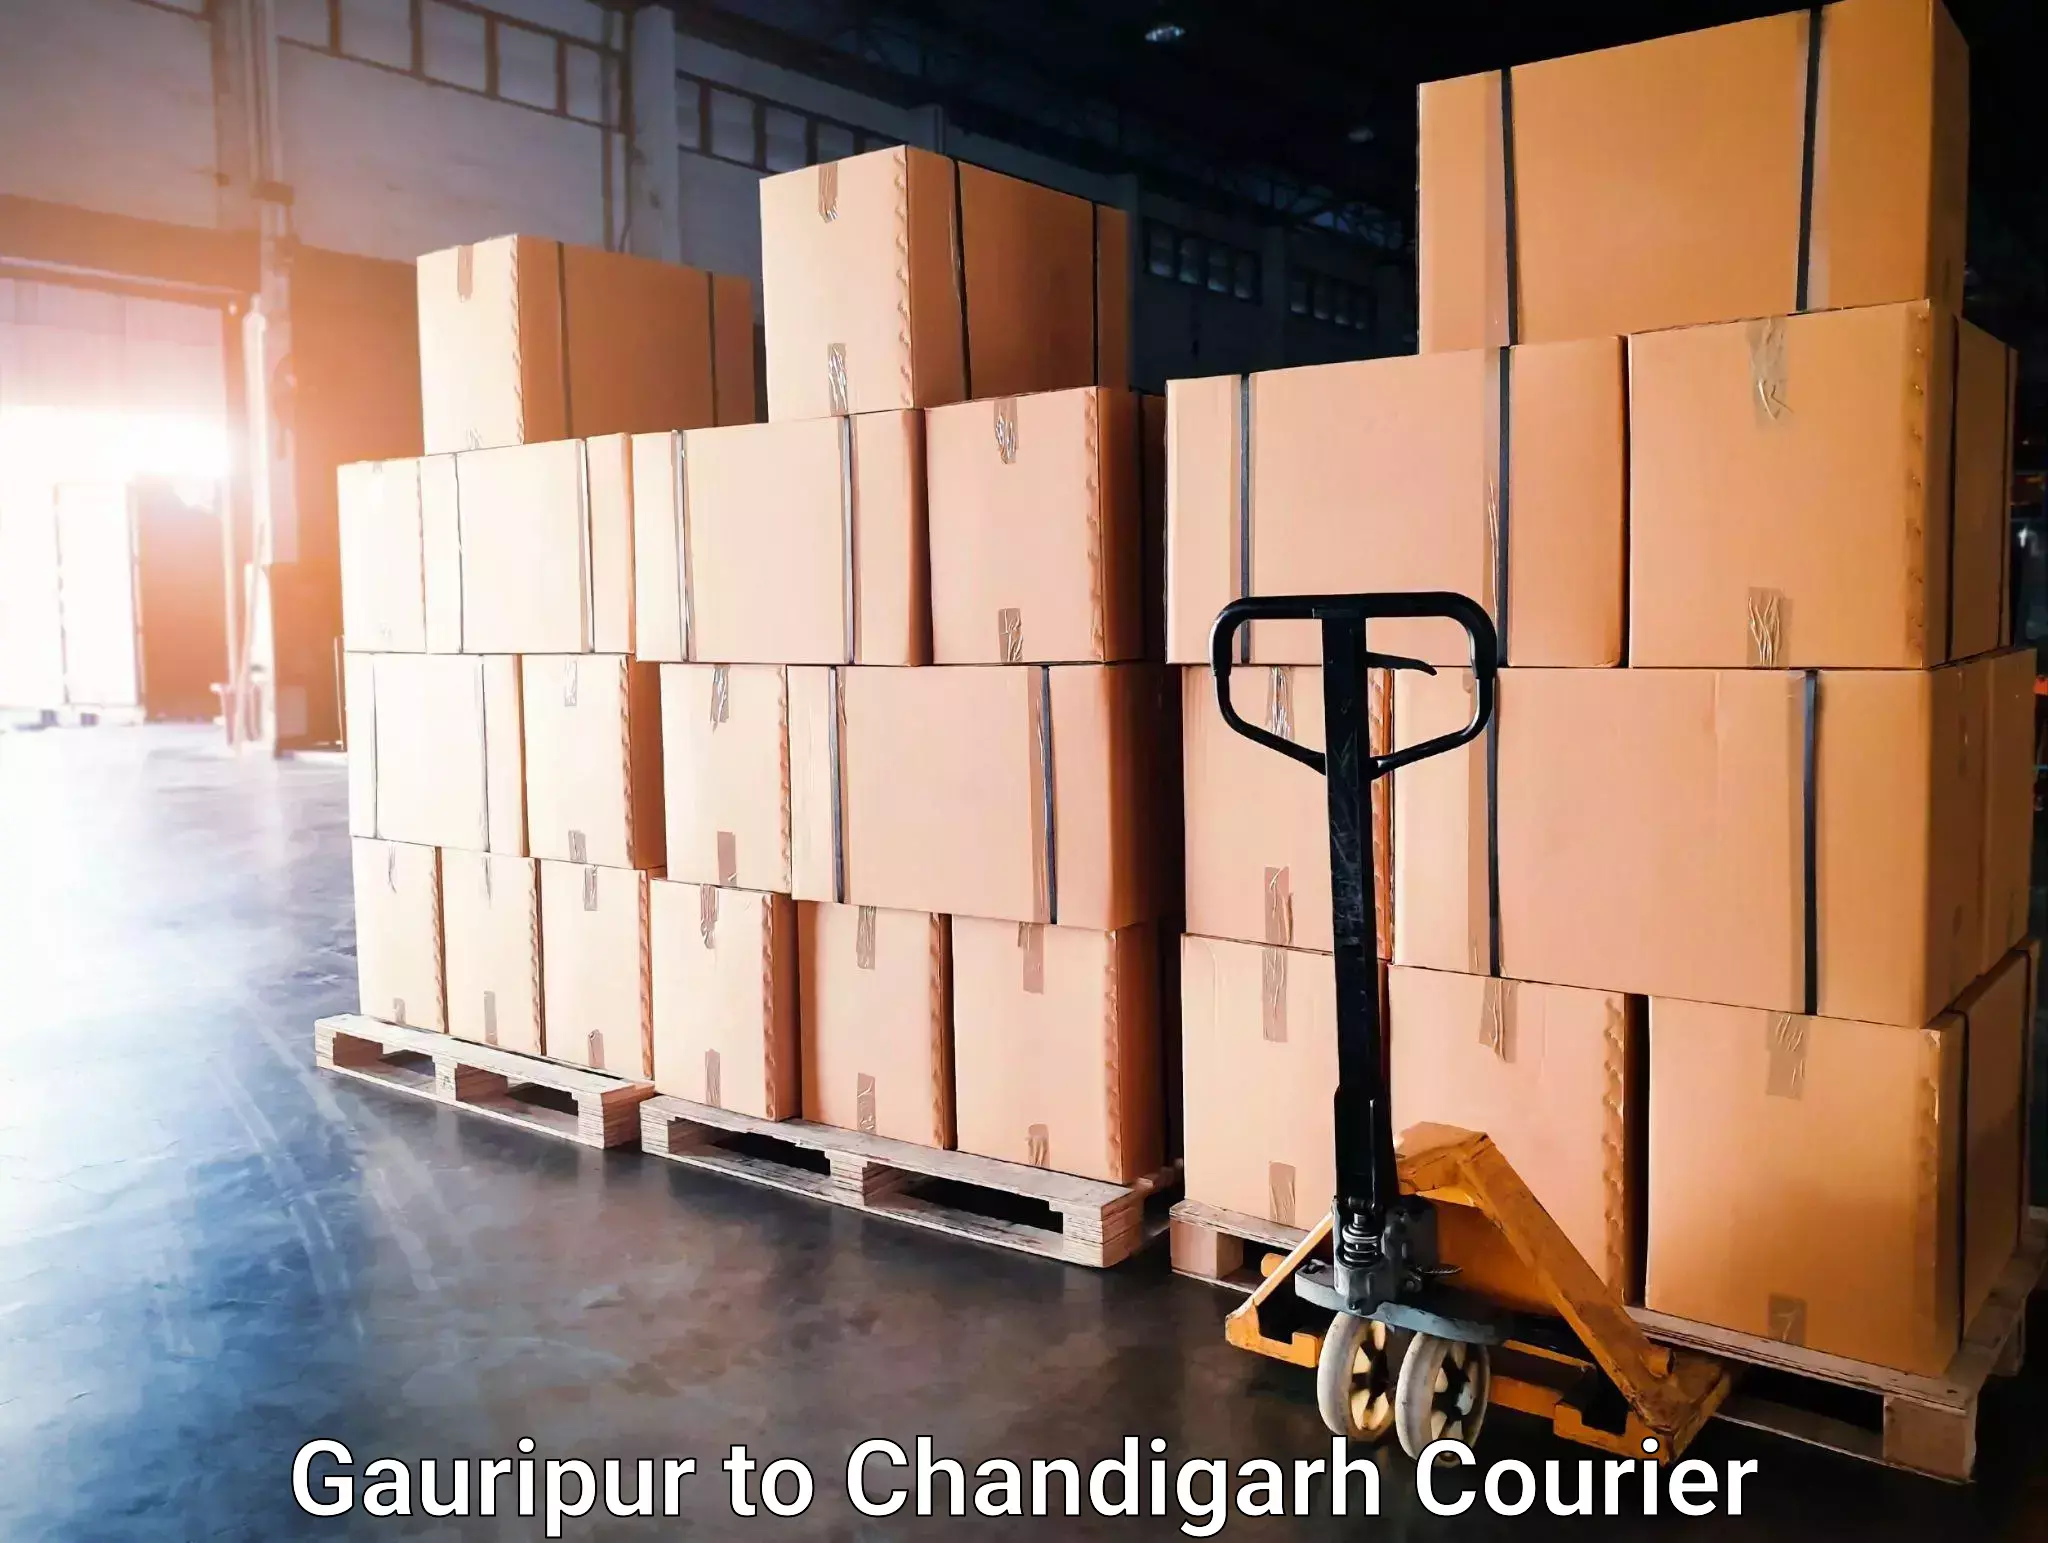 Furniture delivery service Gauripur to Chandigarh